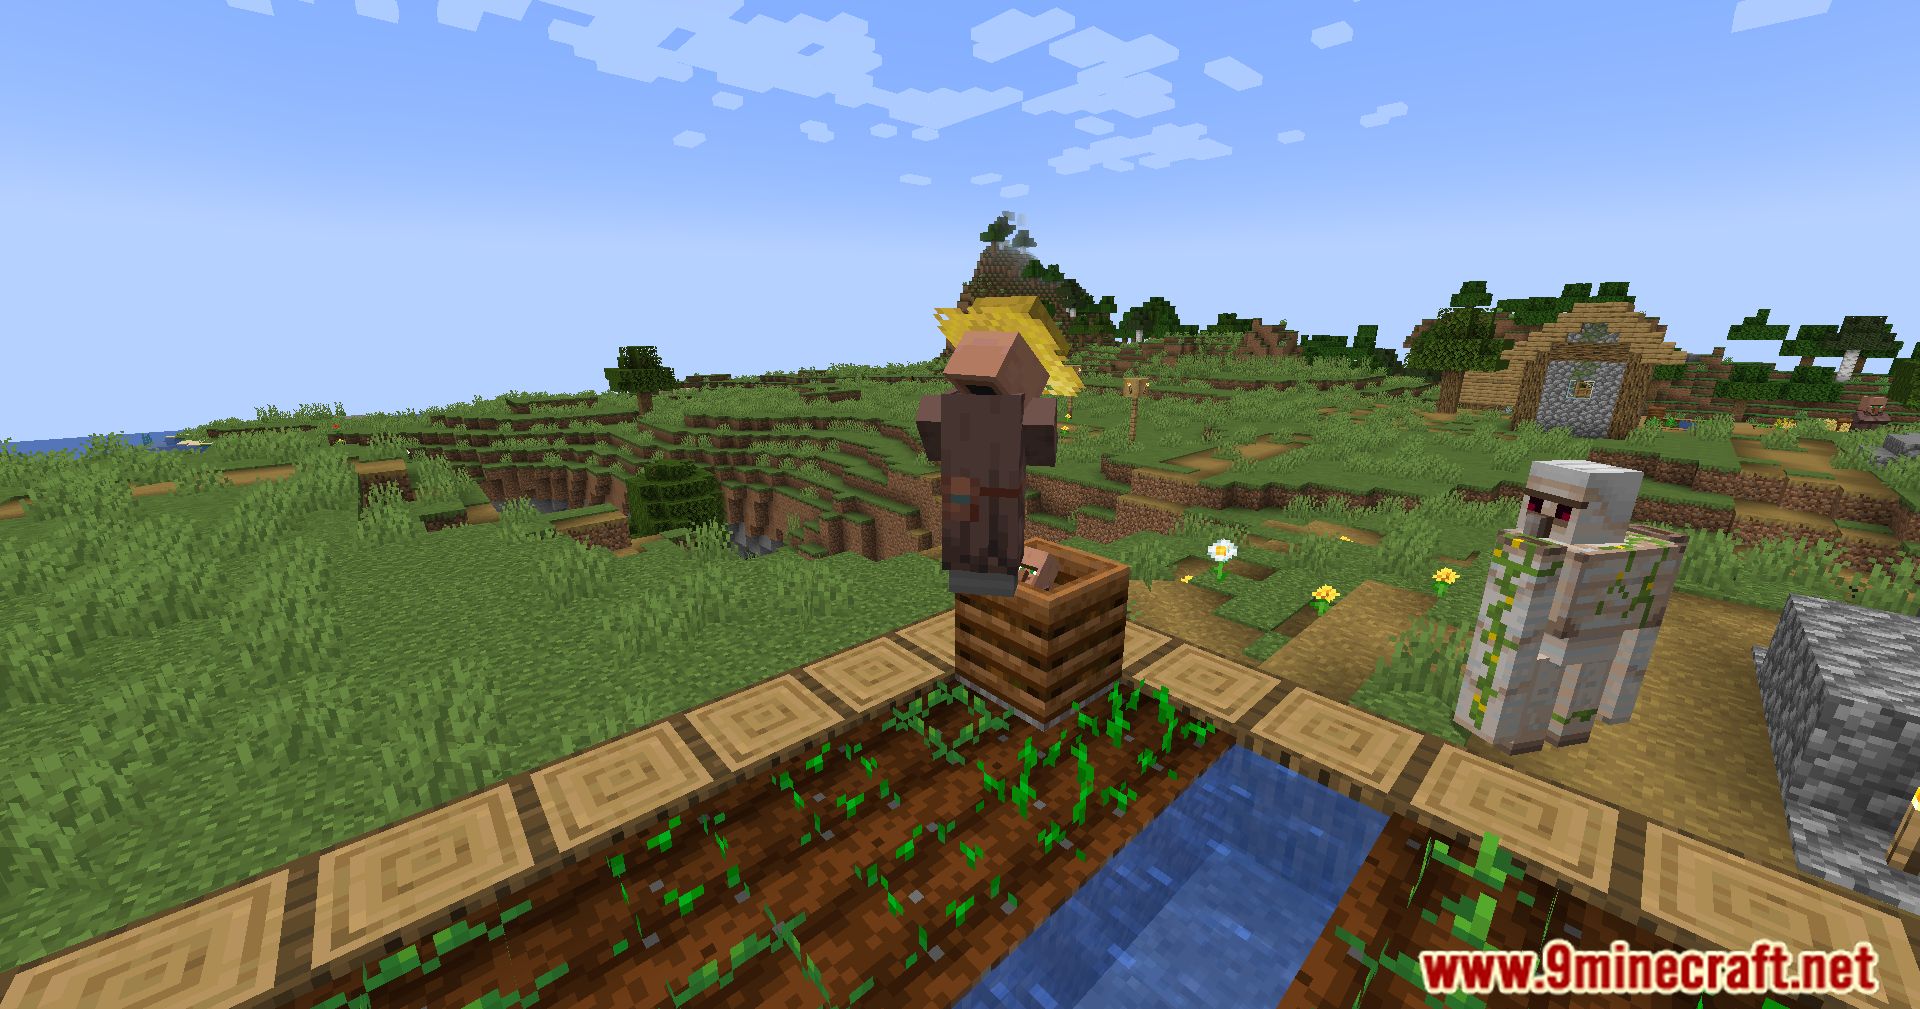 Friendly Griefing Mod (1.20.1, 1.19.4) - Configurable Control Over Griefing In Minecraft. 4